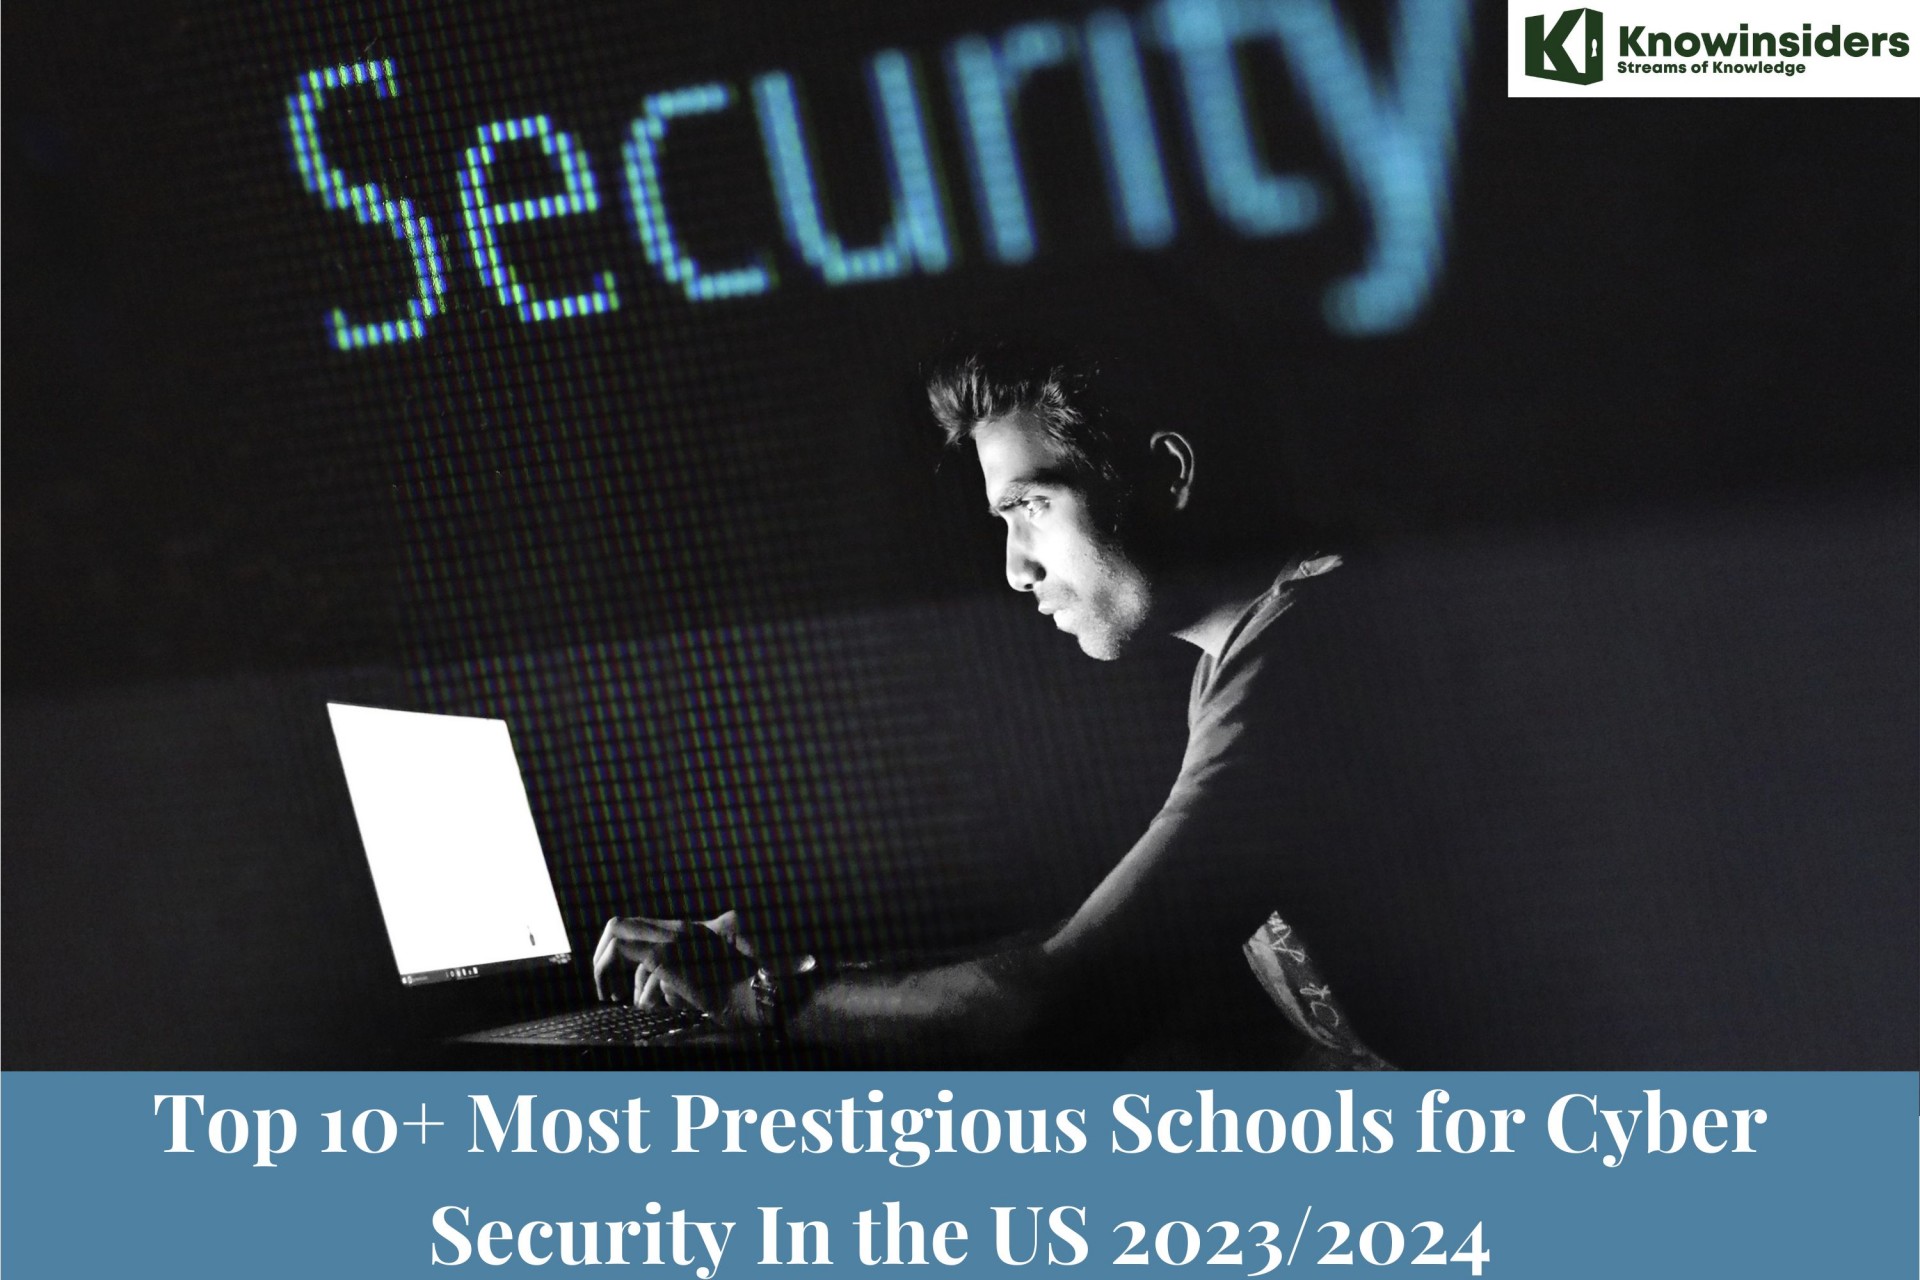 Top 10+ Most Prestigious Schools for Cyber Security In the US 2023/2024